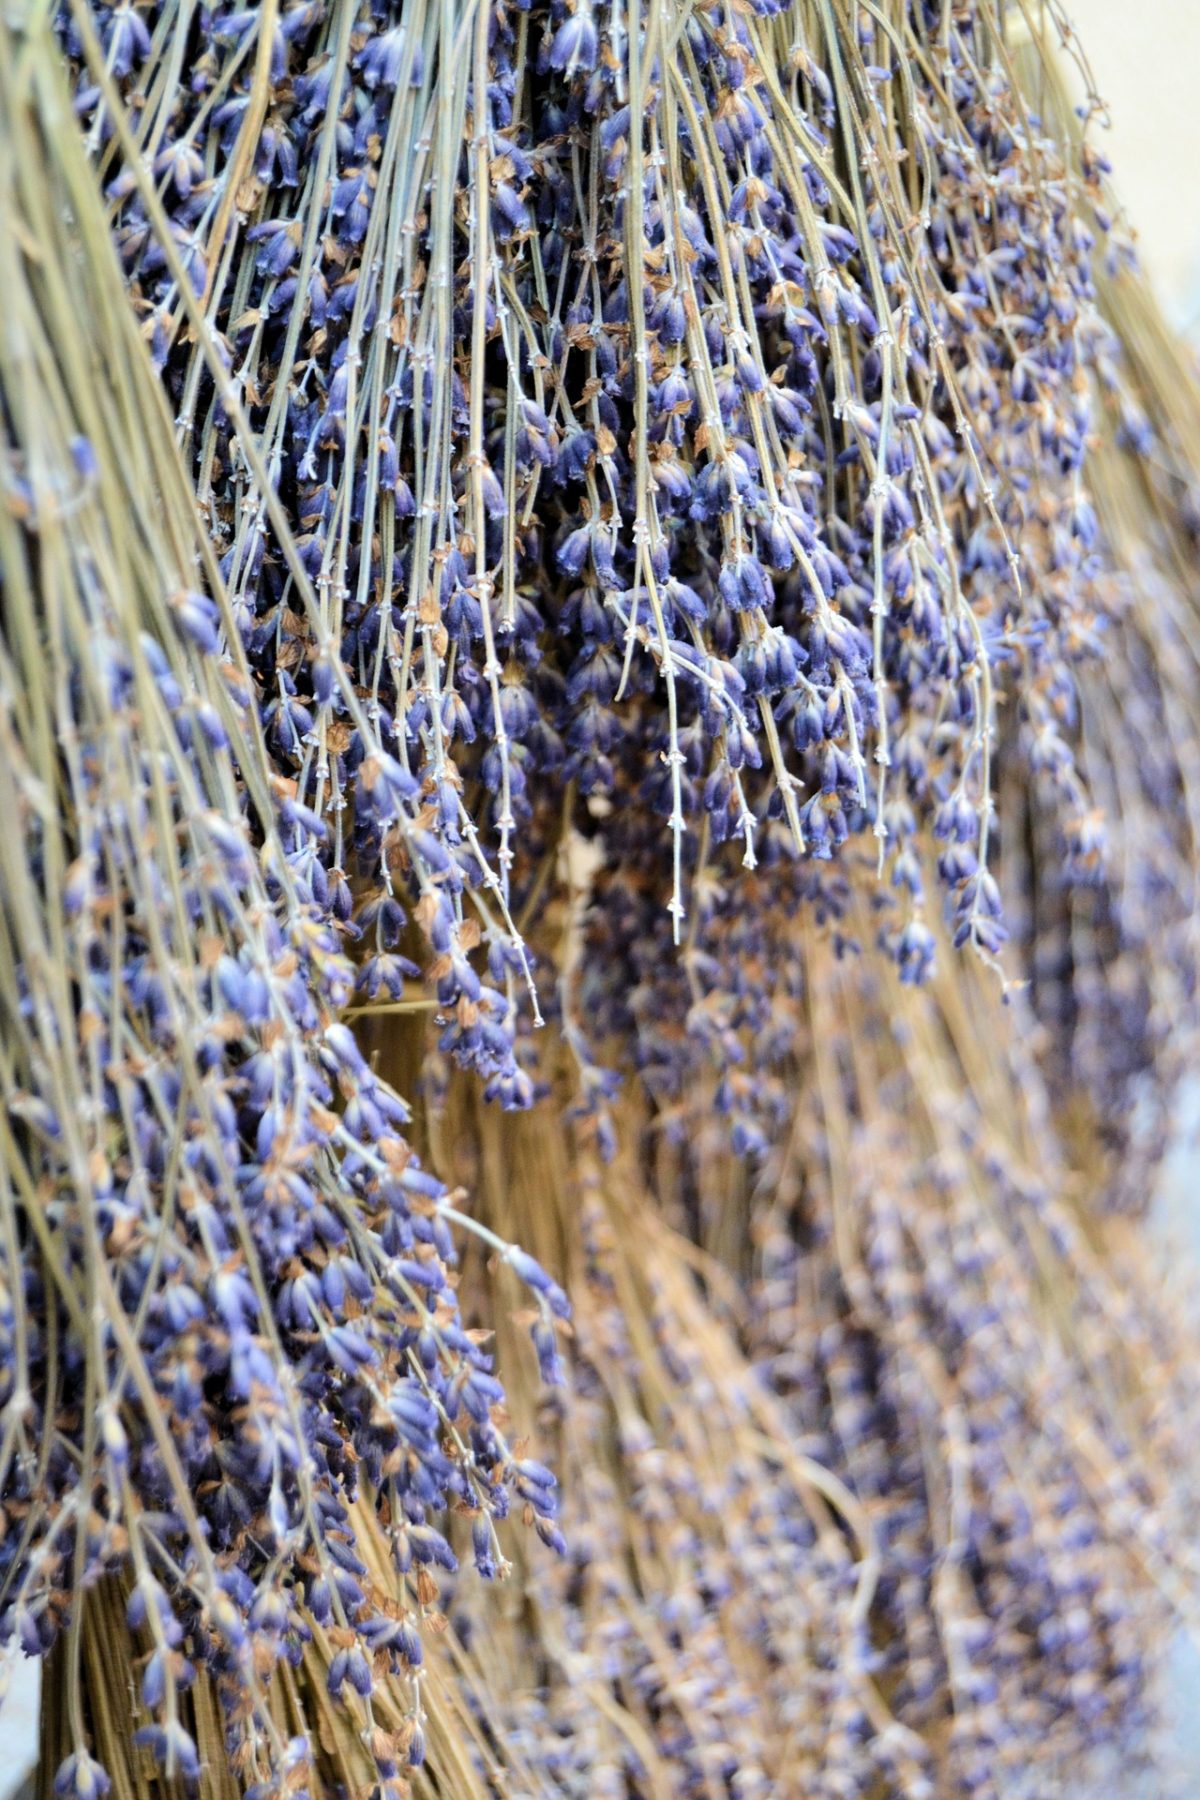 Lavender Essential Oil: A Must-Have For Every Natural Medicine Chest | Herbal Academy | Learn all about lavender essential oil and how to use it safely in your home and for your family's health.